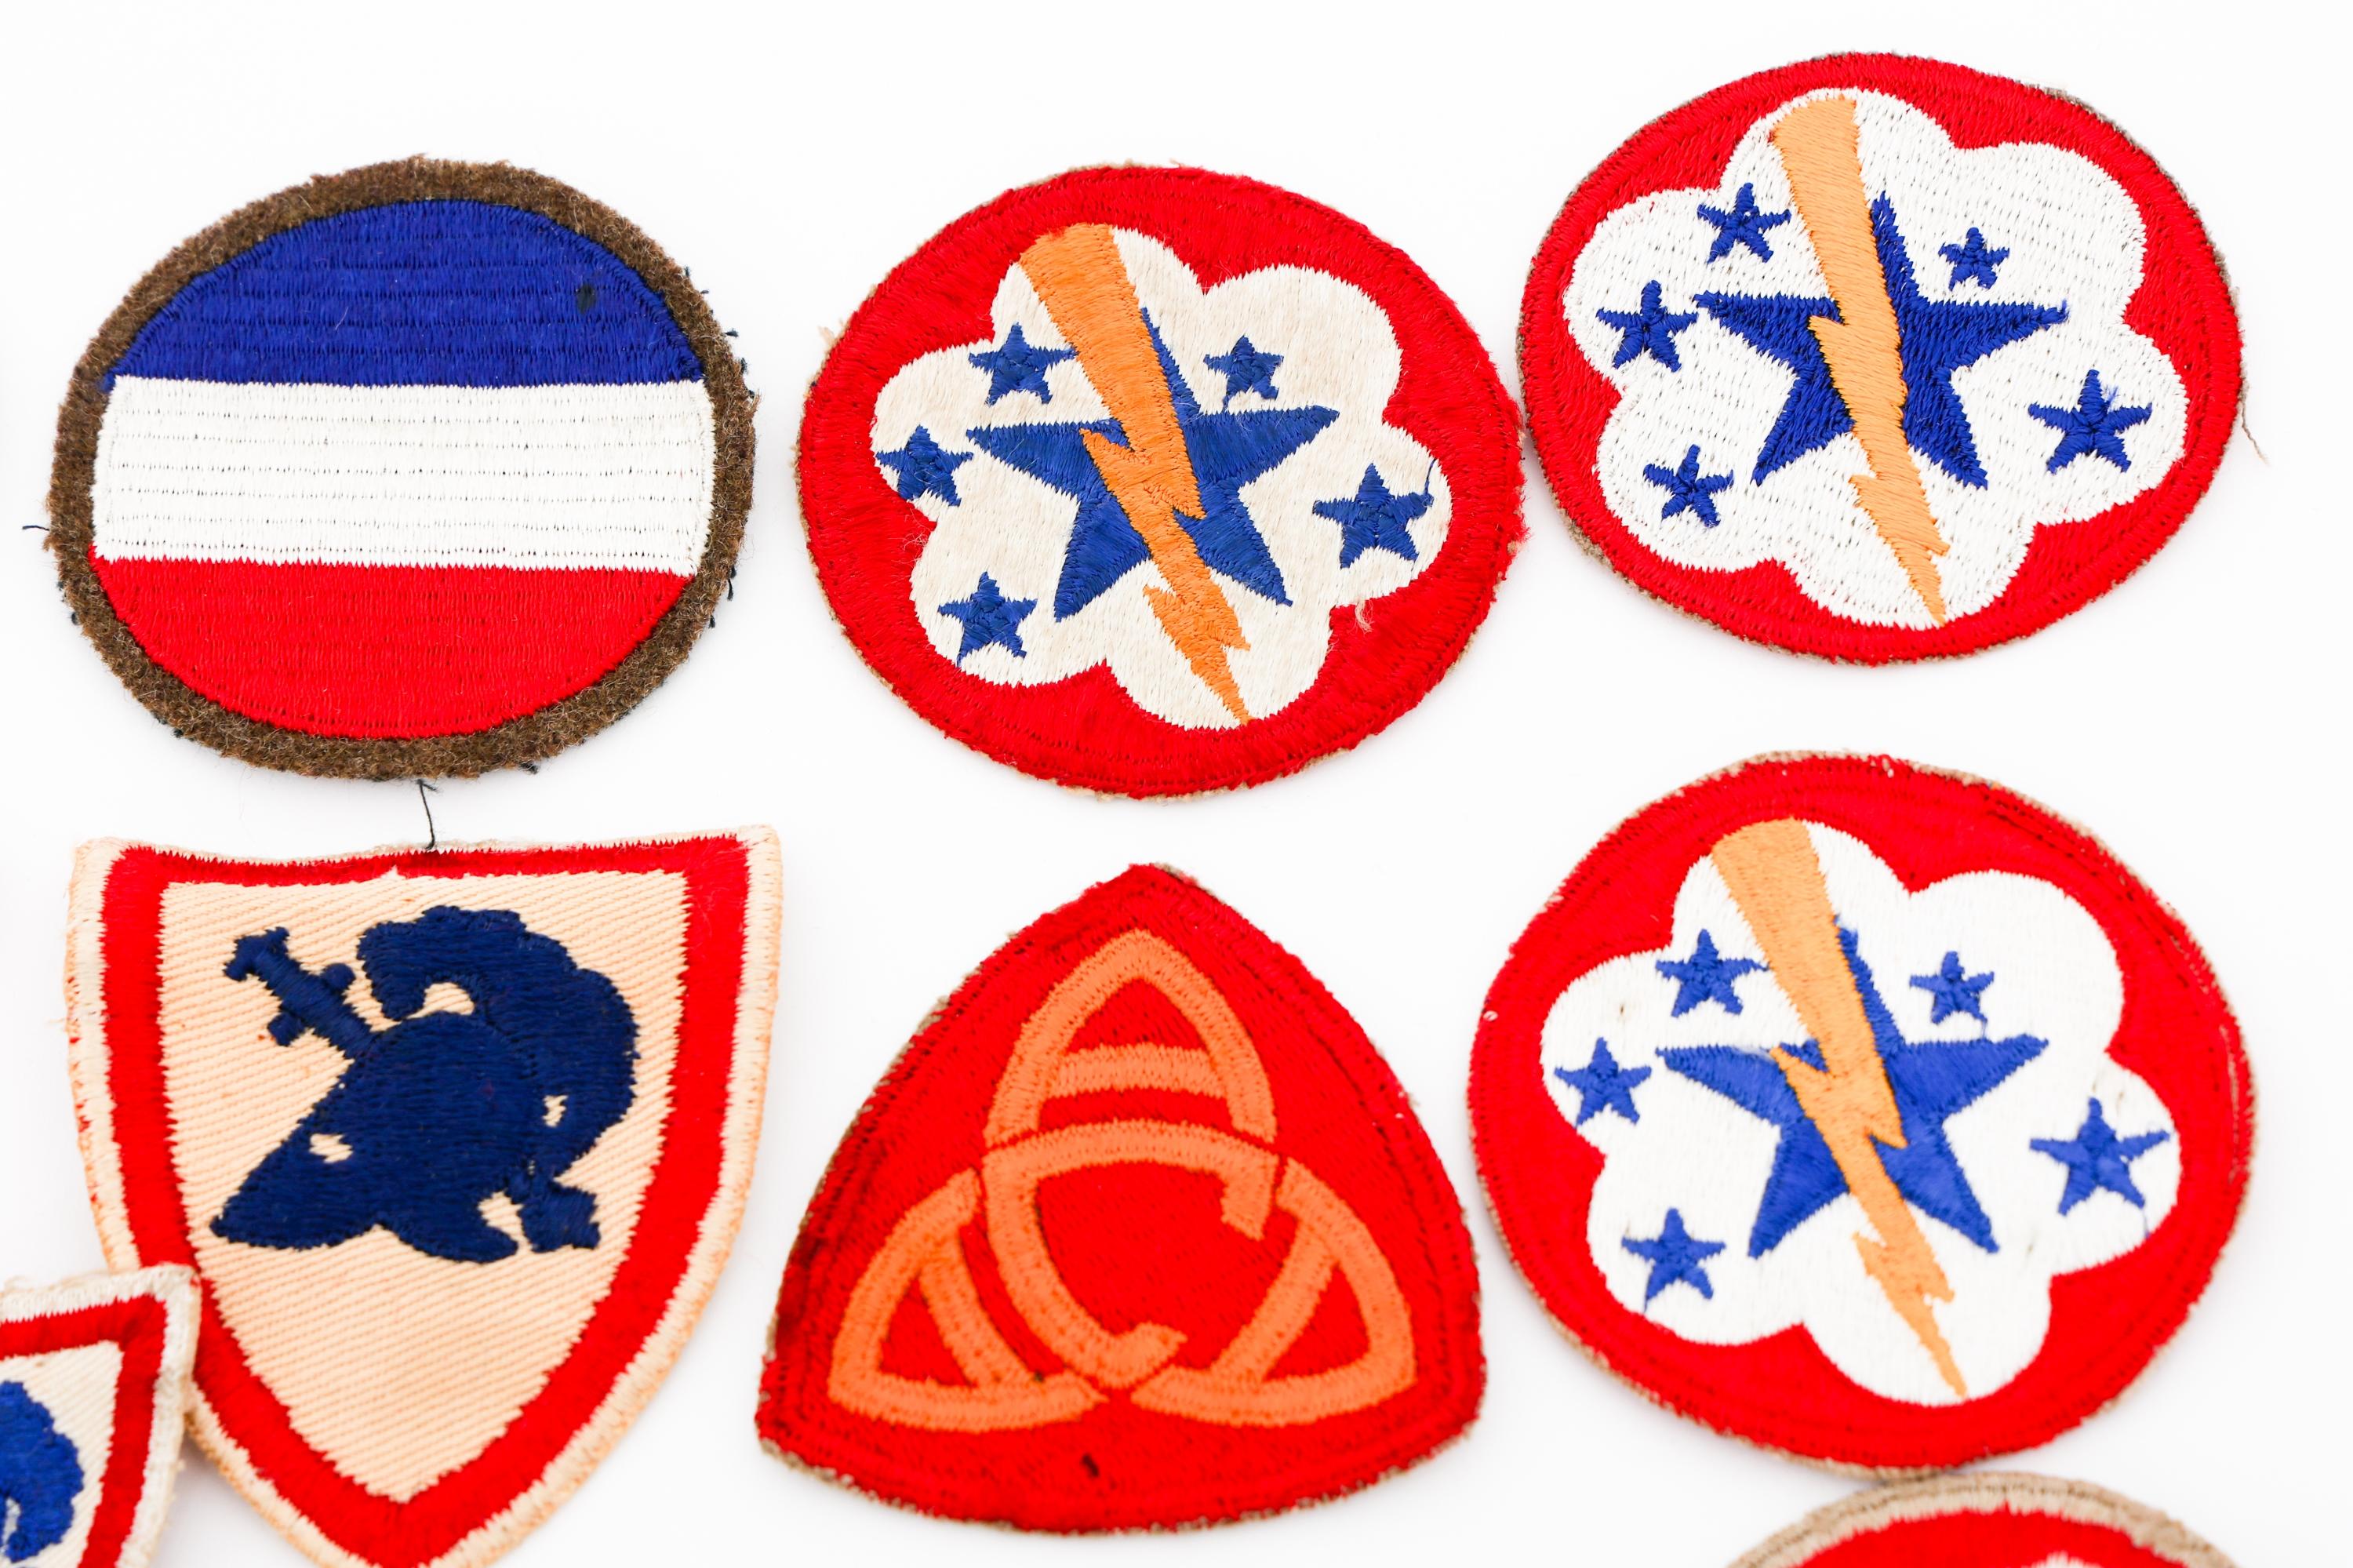 WWII - COLD WAR US ARMY COMMAND & SCHOOL PATCHES